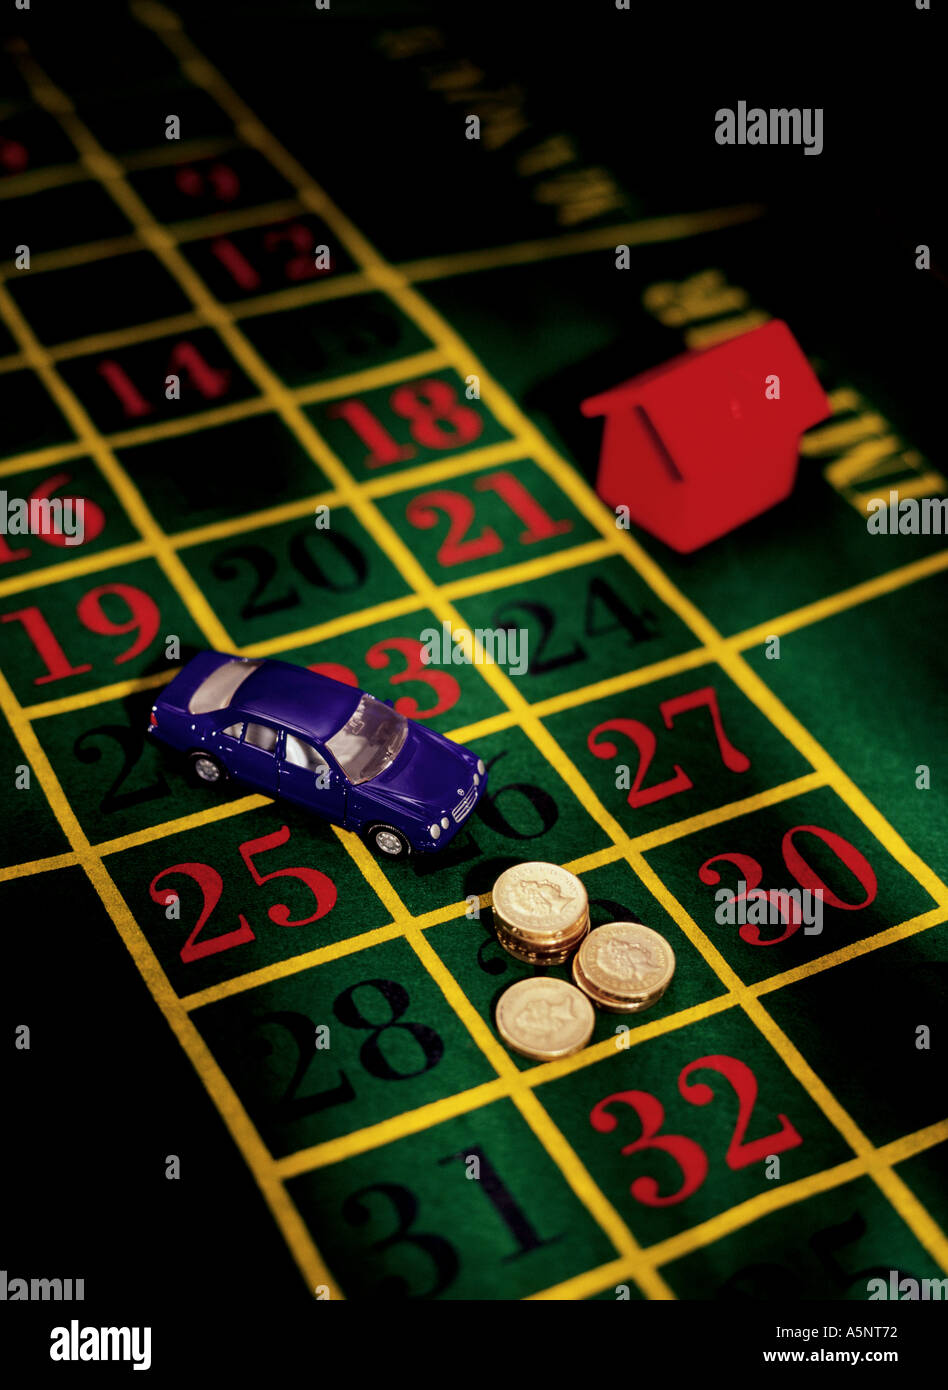 Gambling money cars and property Stock Photo